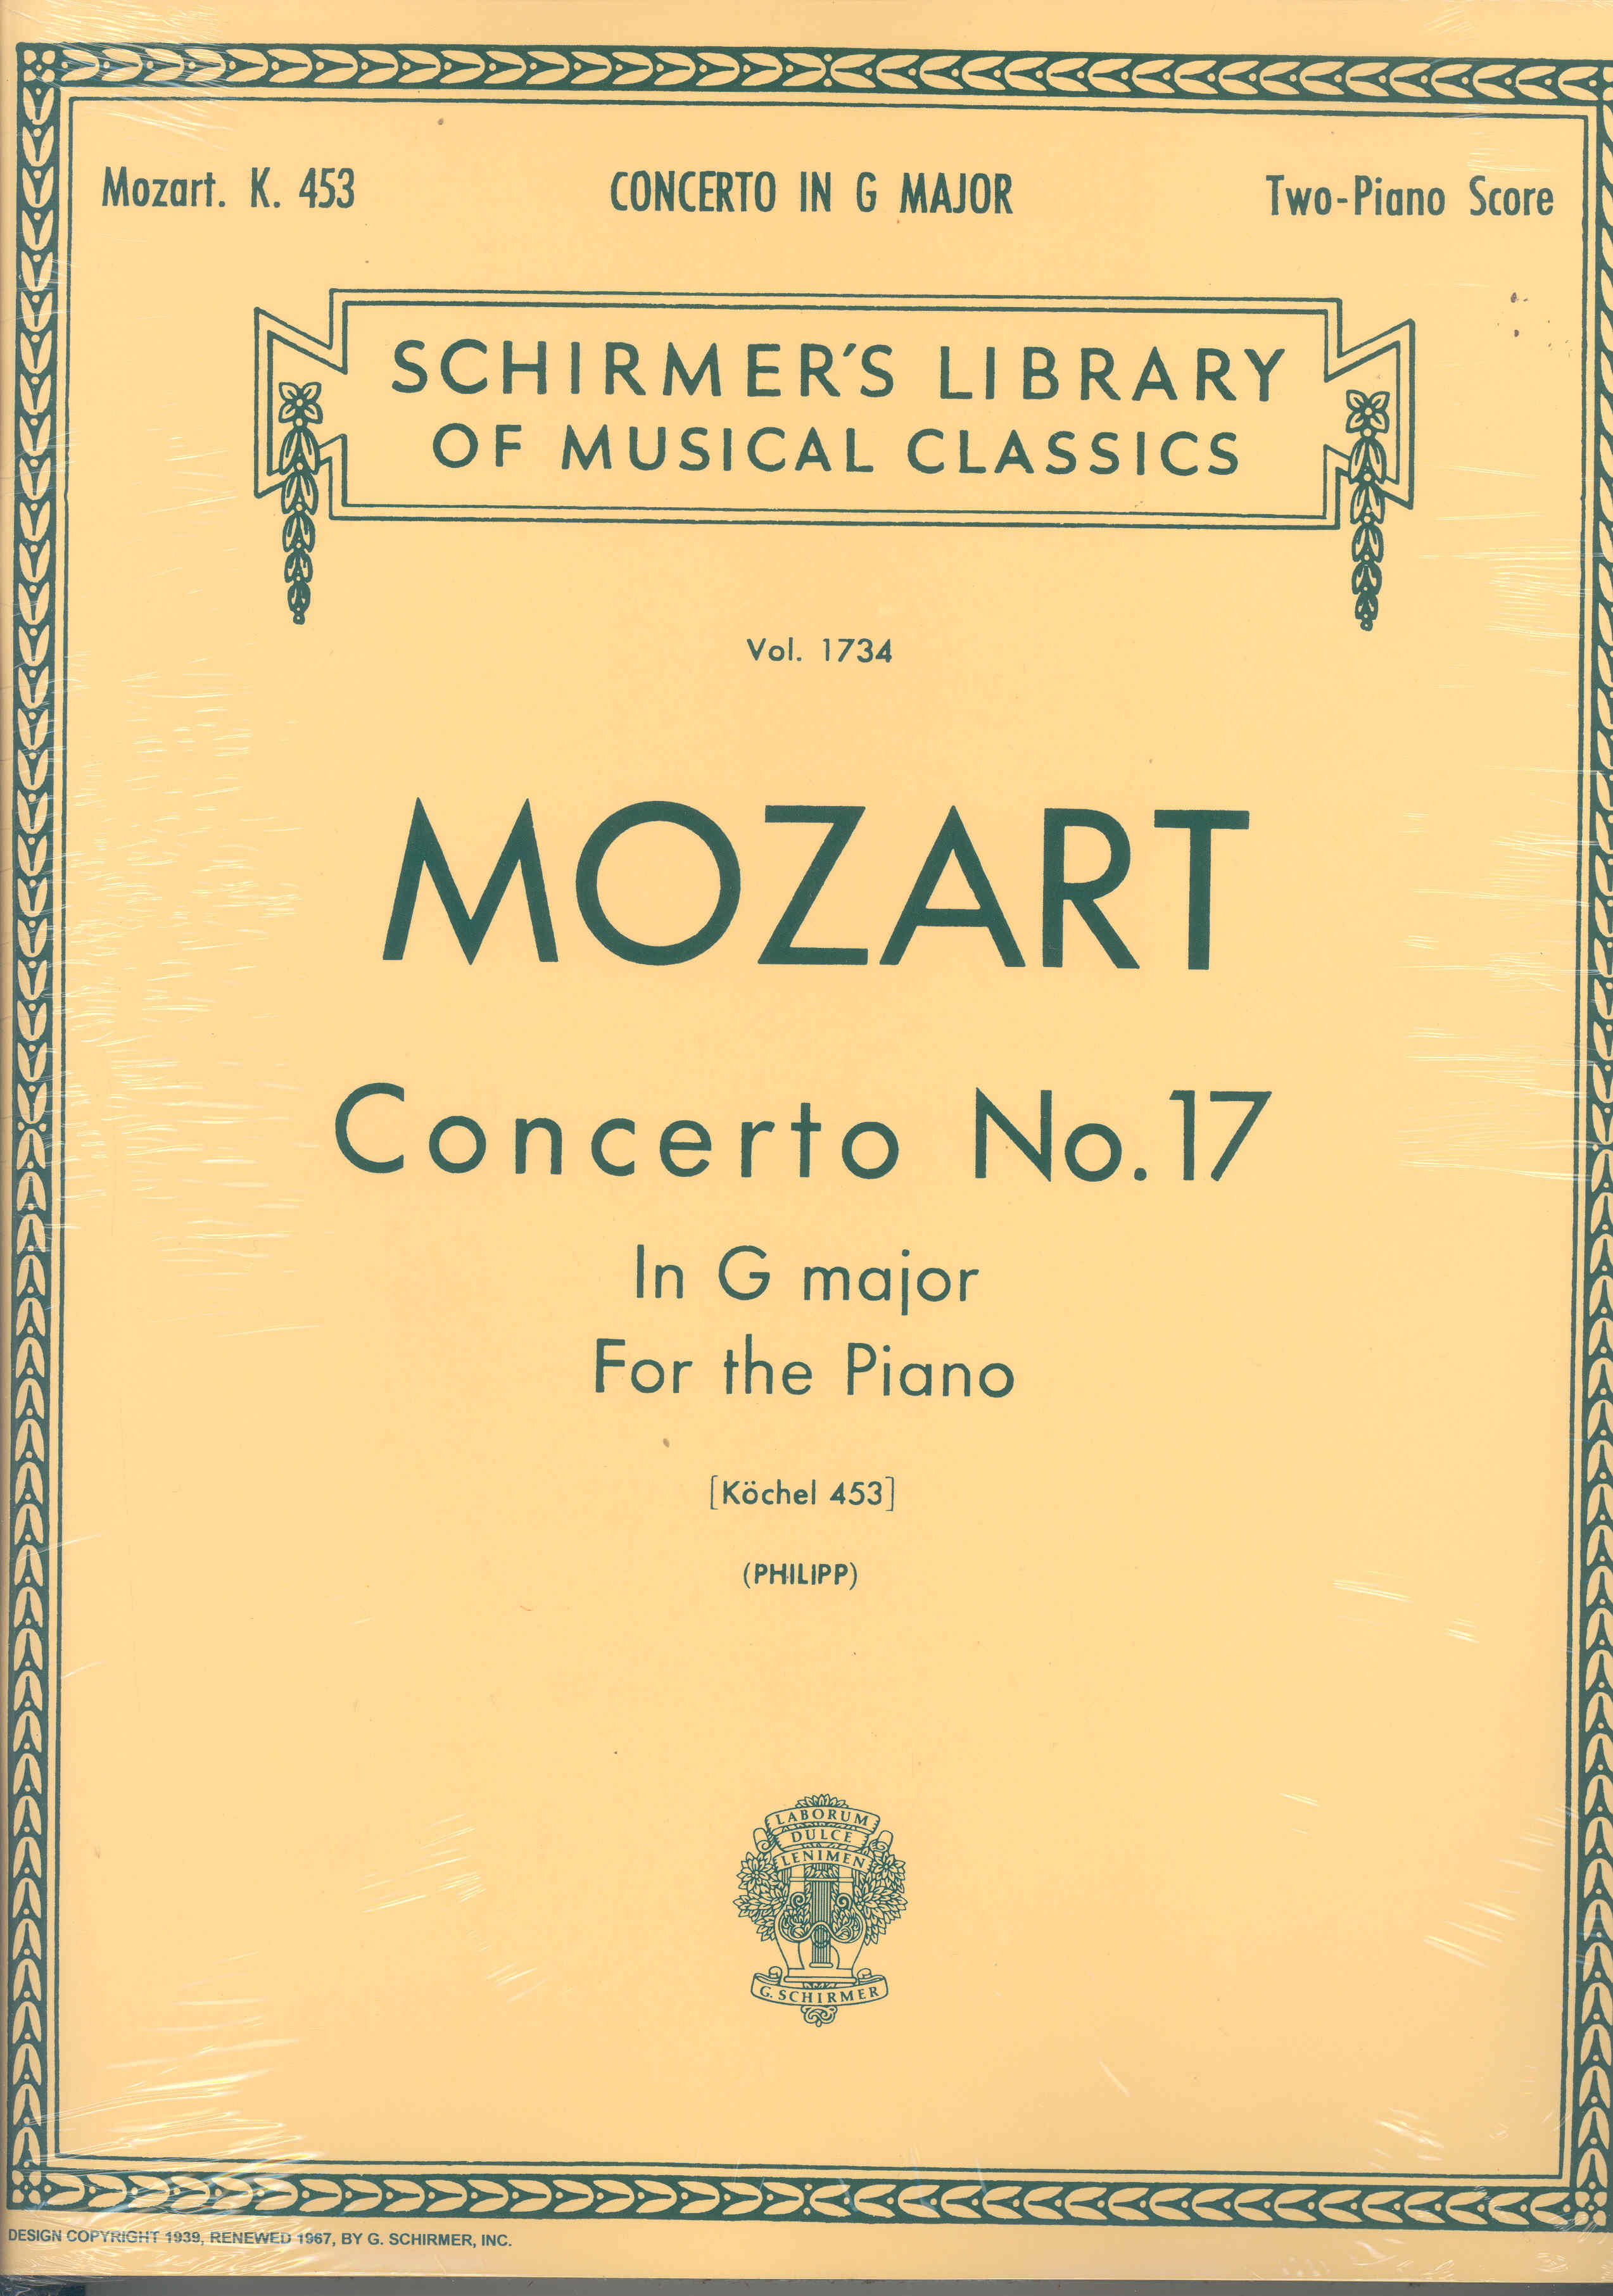 Mozart Concerto In G Kv453 For 2 Pianos (philip) Sheet Music Songbook